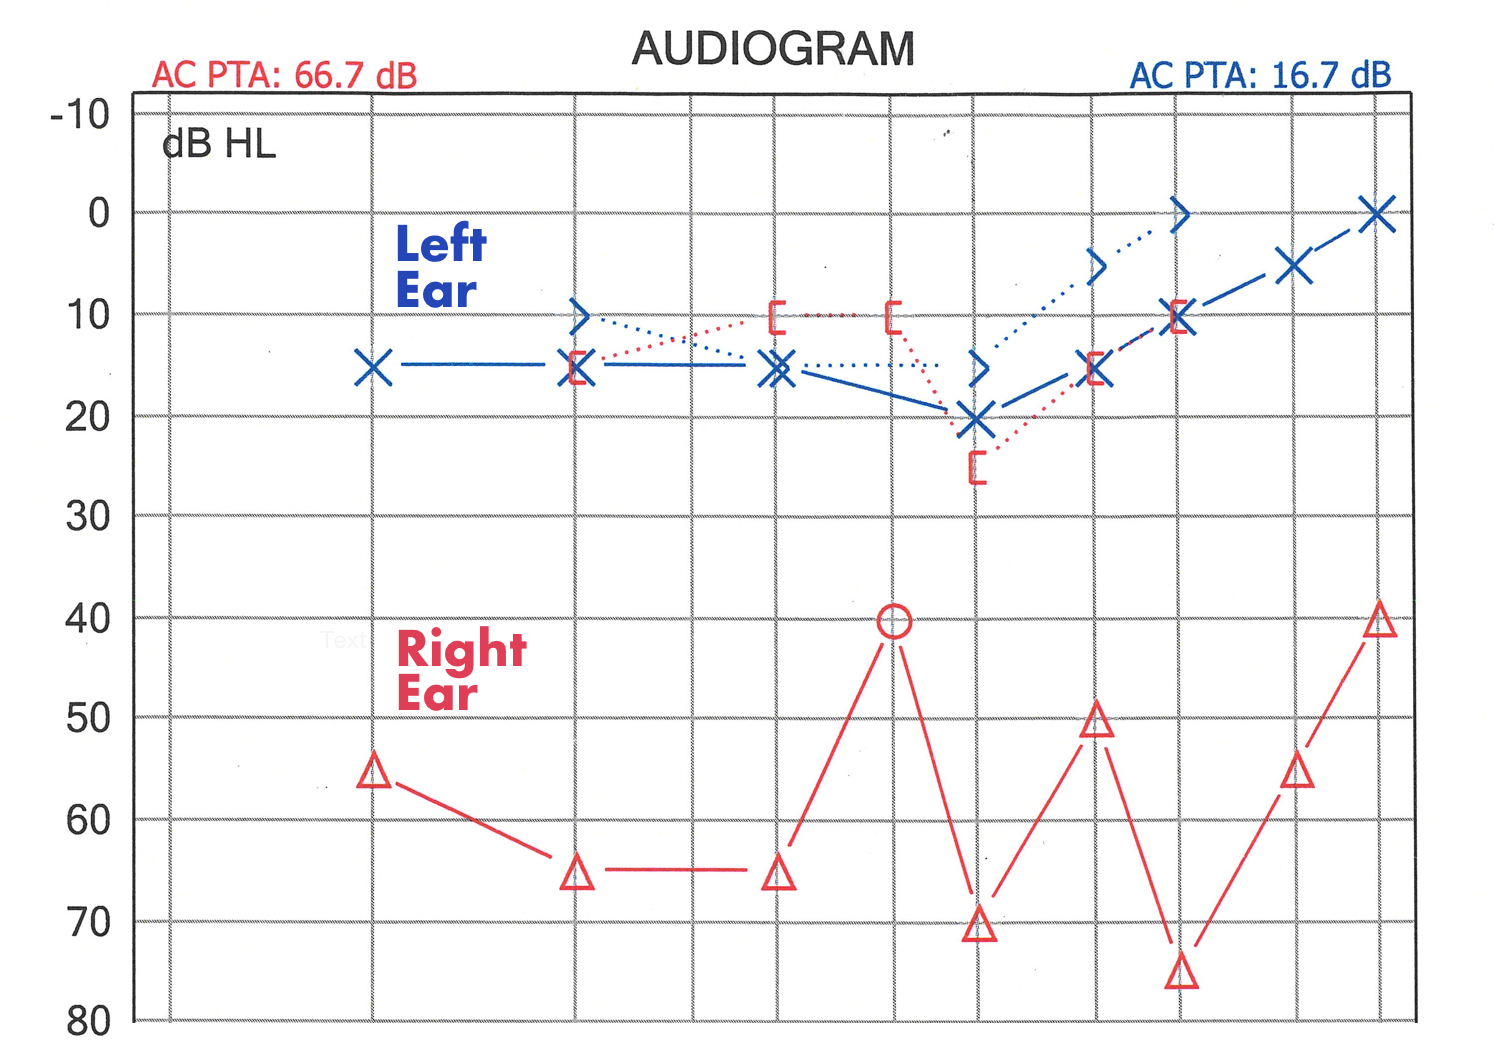 Results of audiology test